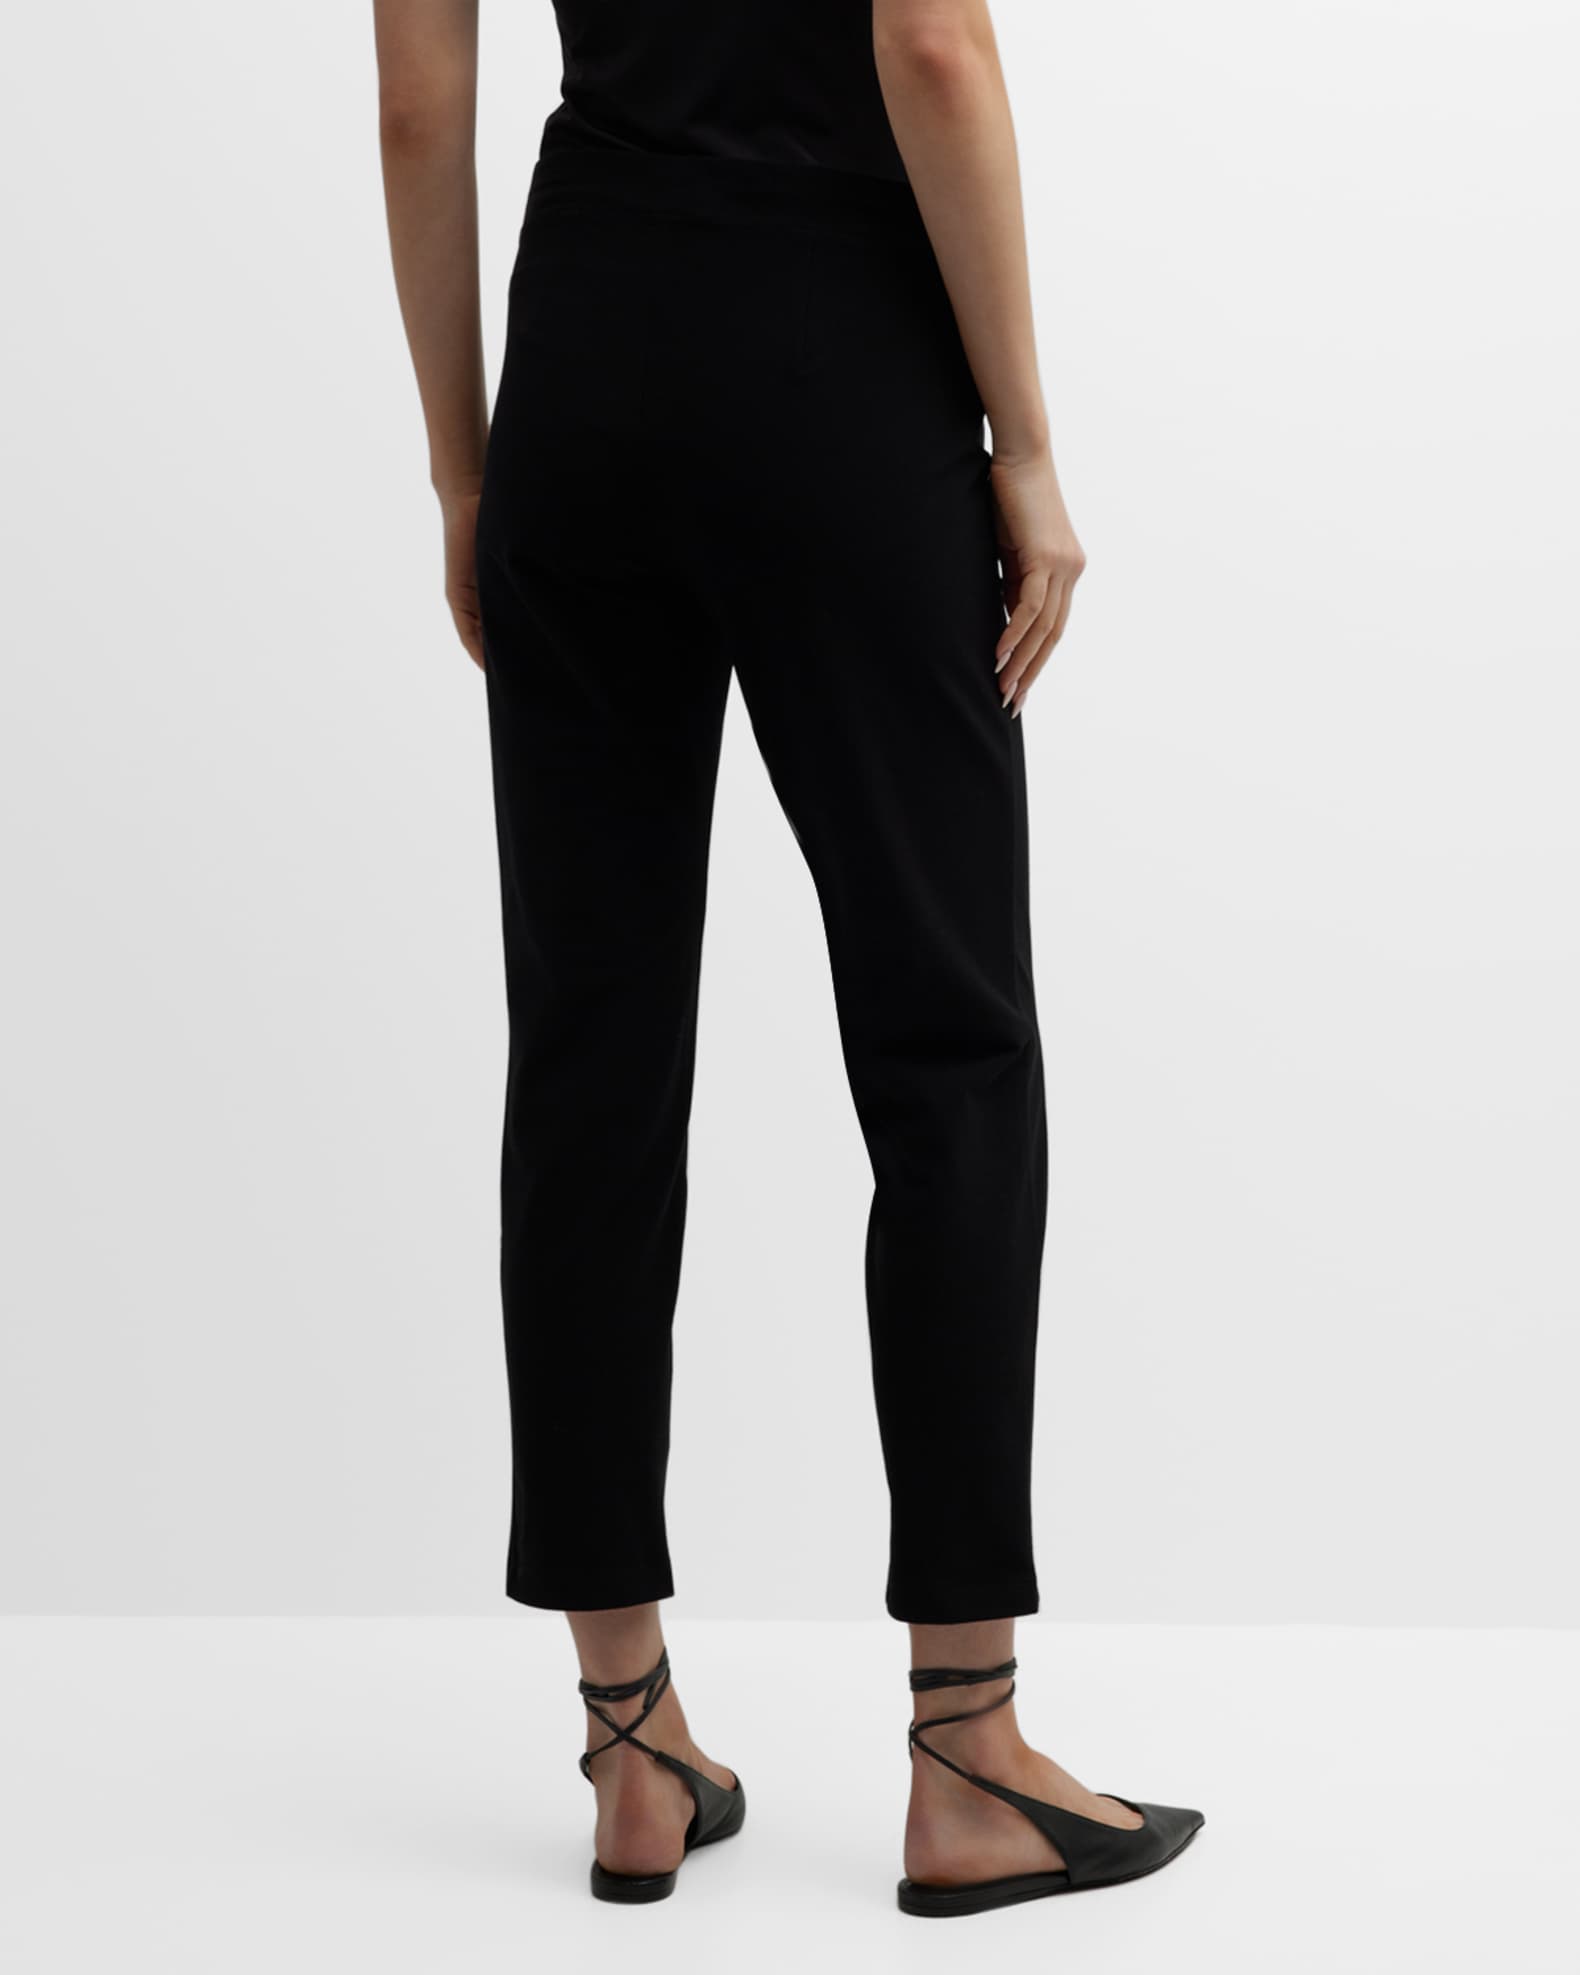 Eileen Fisher Washable Stretch Crepe Slim Ankle Pants